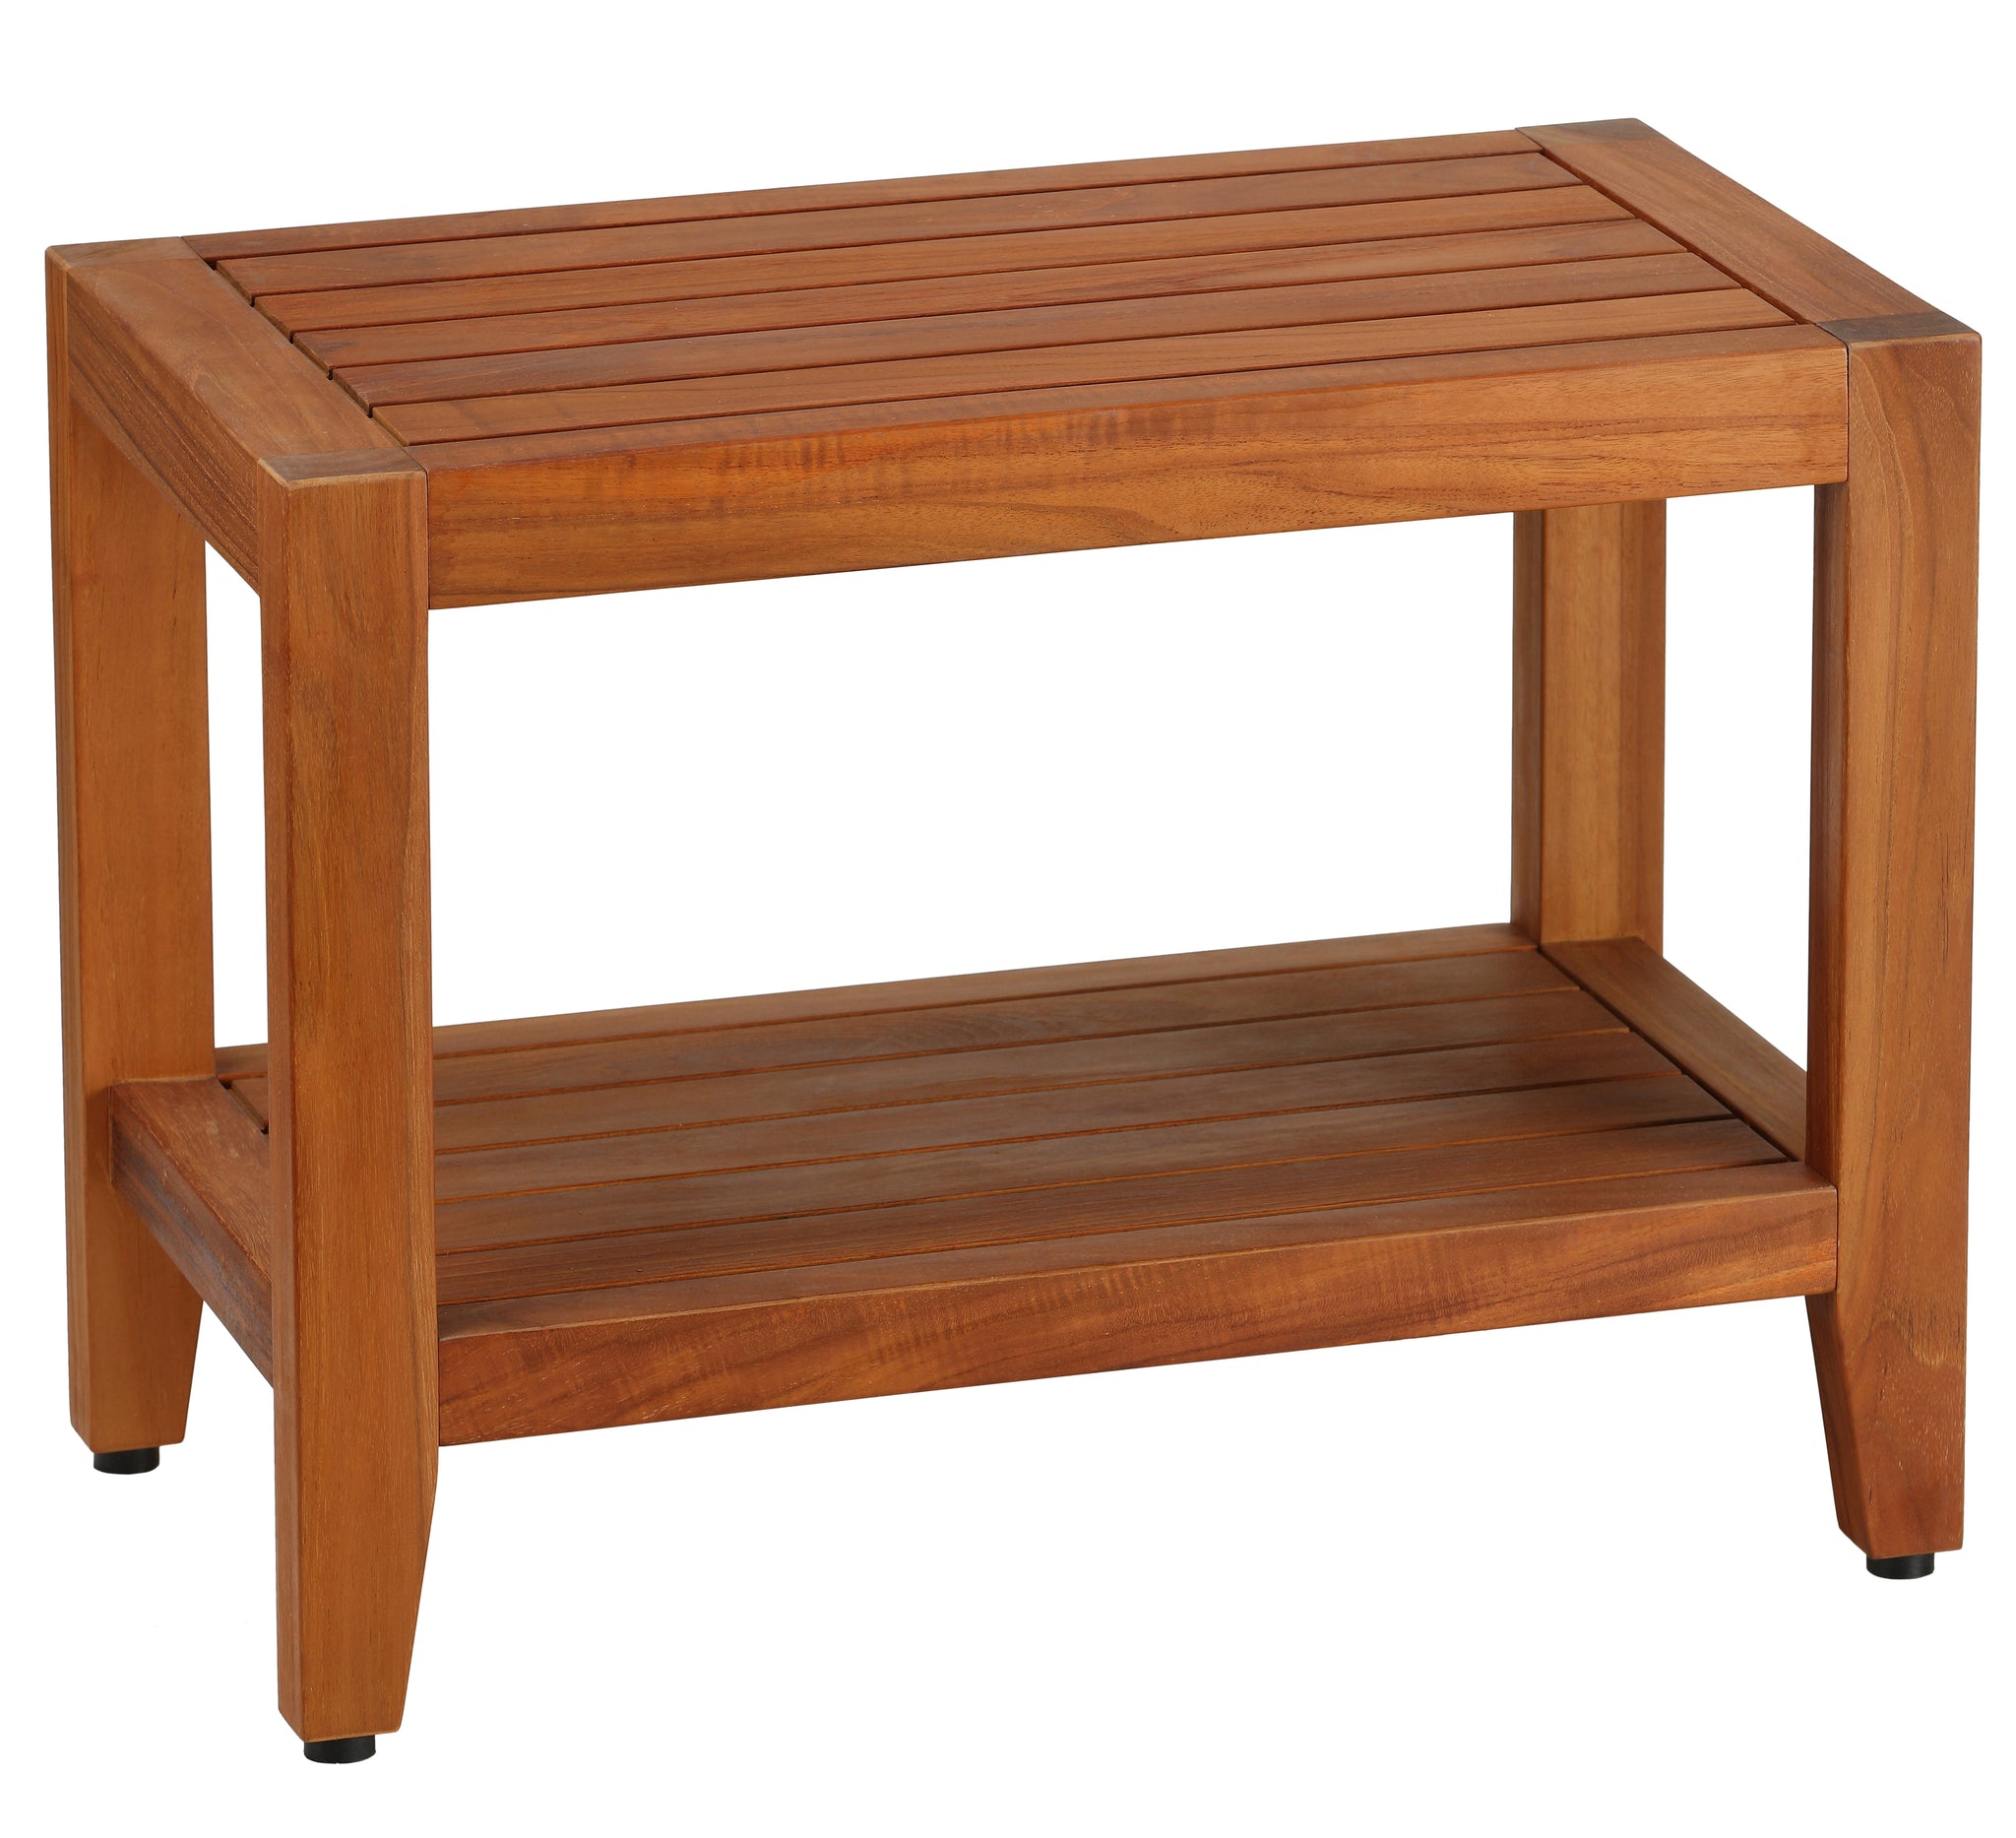 Bare Decor Serenity Spa 24" Bench with Shelf in Solid Teak Wood